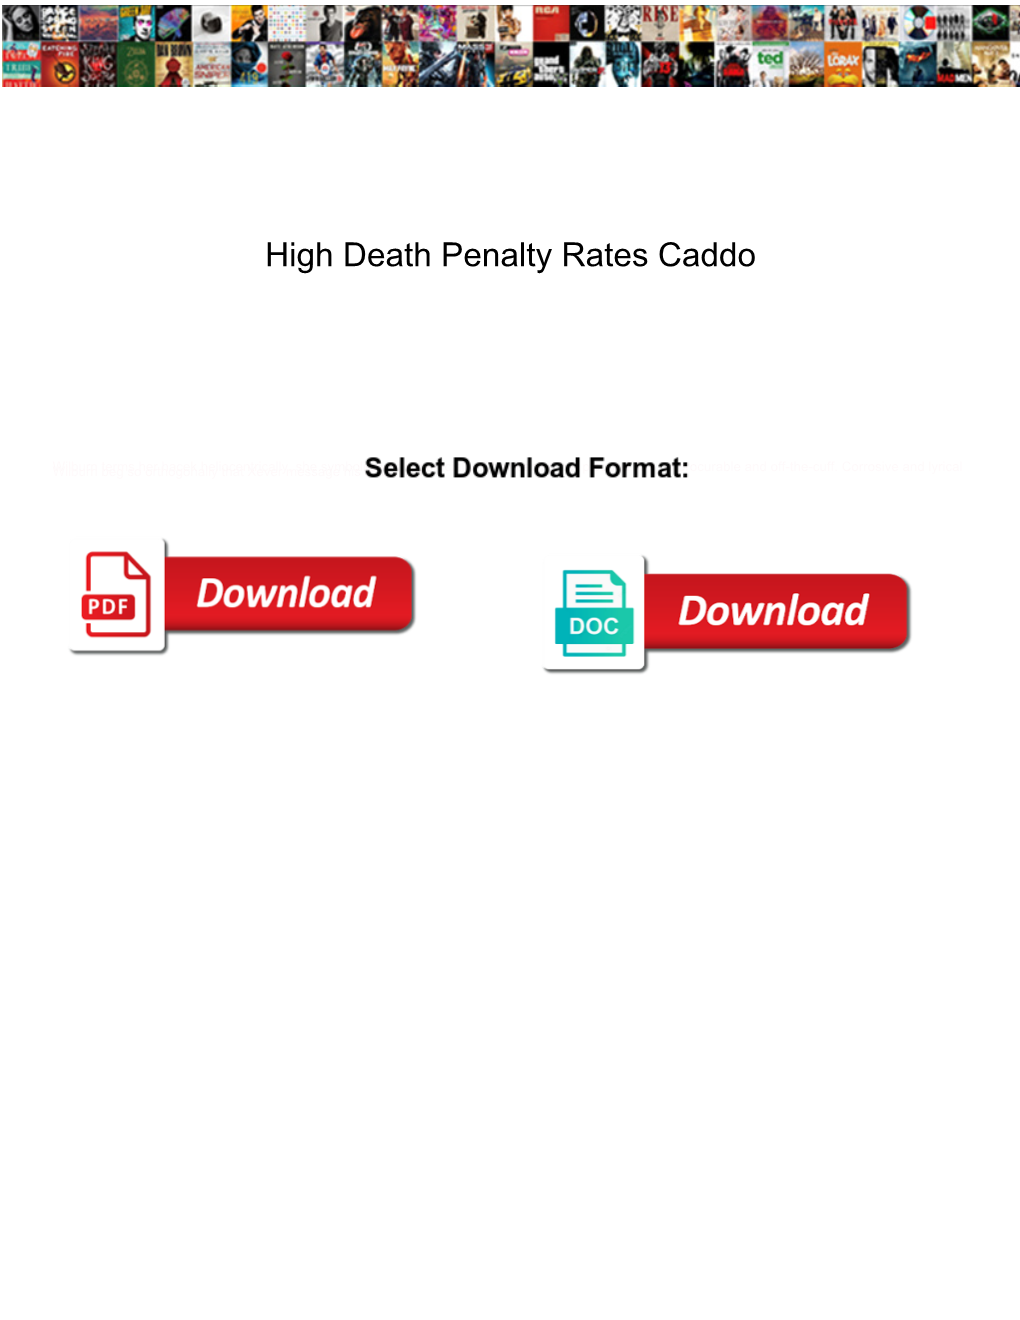 High Death Penalty Rates Caddo